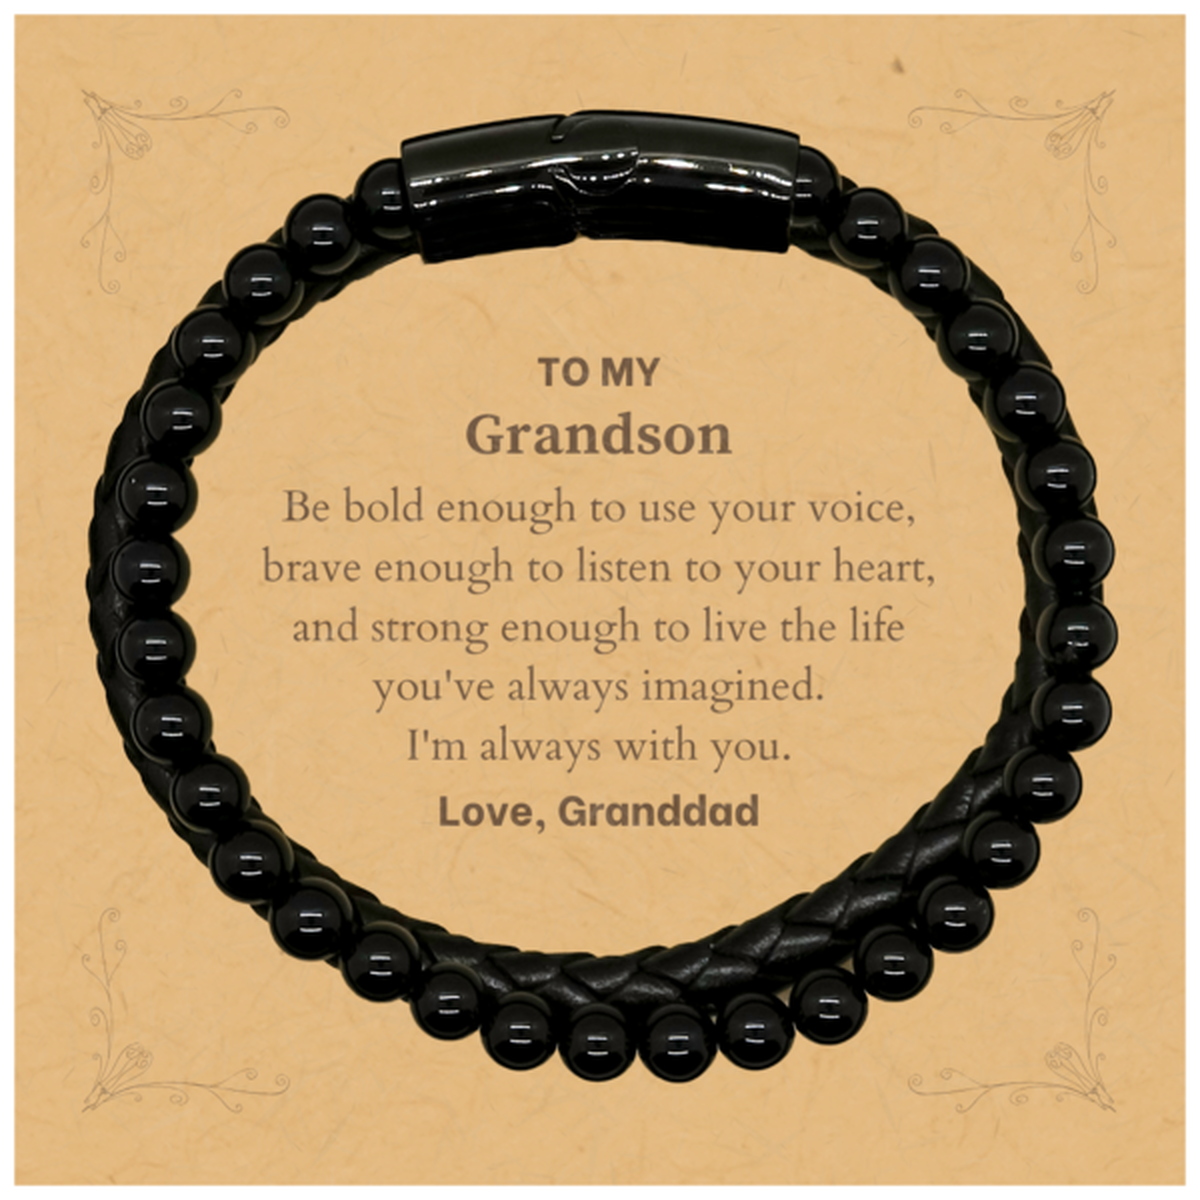 Keepsake Grandson Stone Leather Bracelets Gift Idea Graduation Christmas Birthday Grandson from Granddad, Grandson Be bold enough to use your voice, brave enough to listen to your heart. Love, Granddad